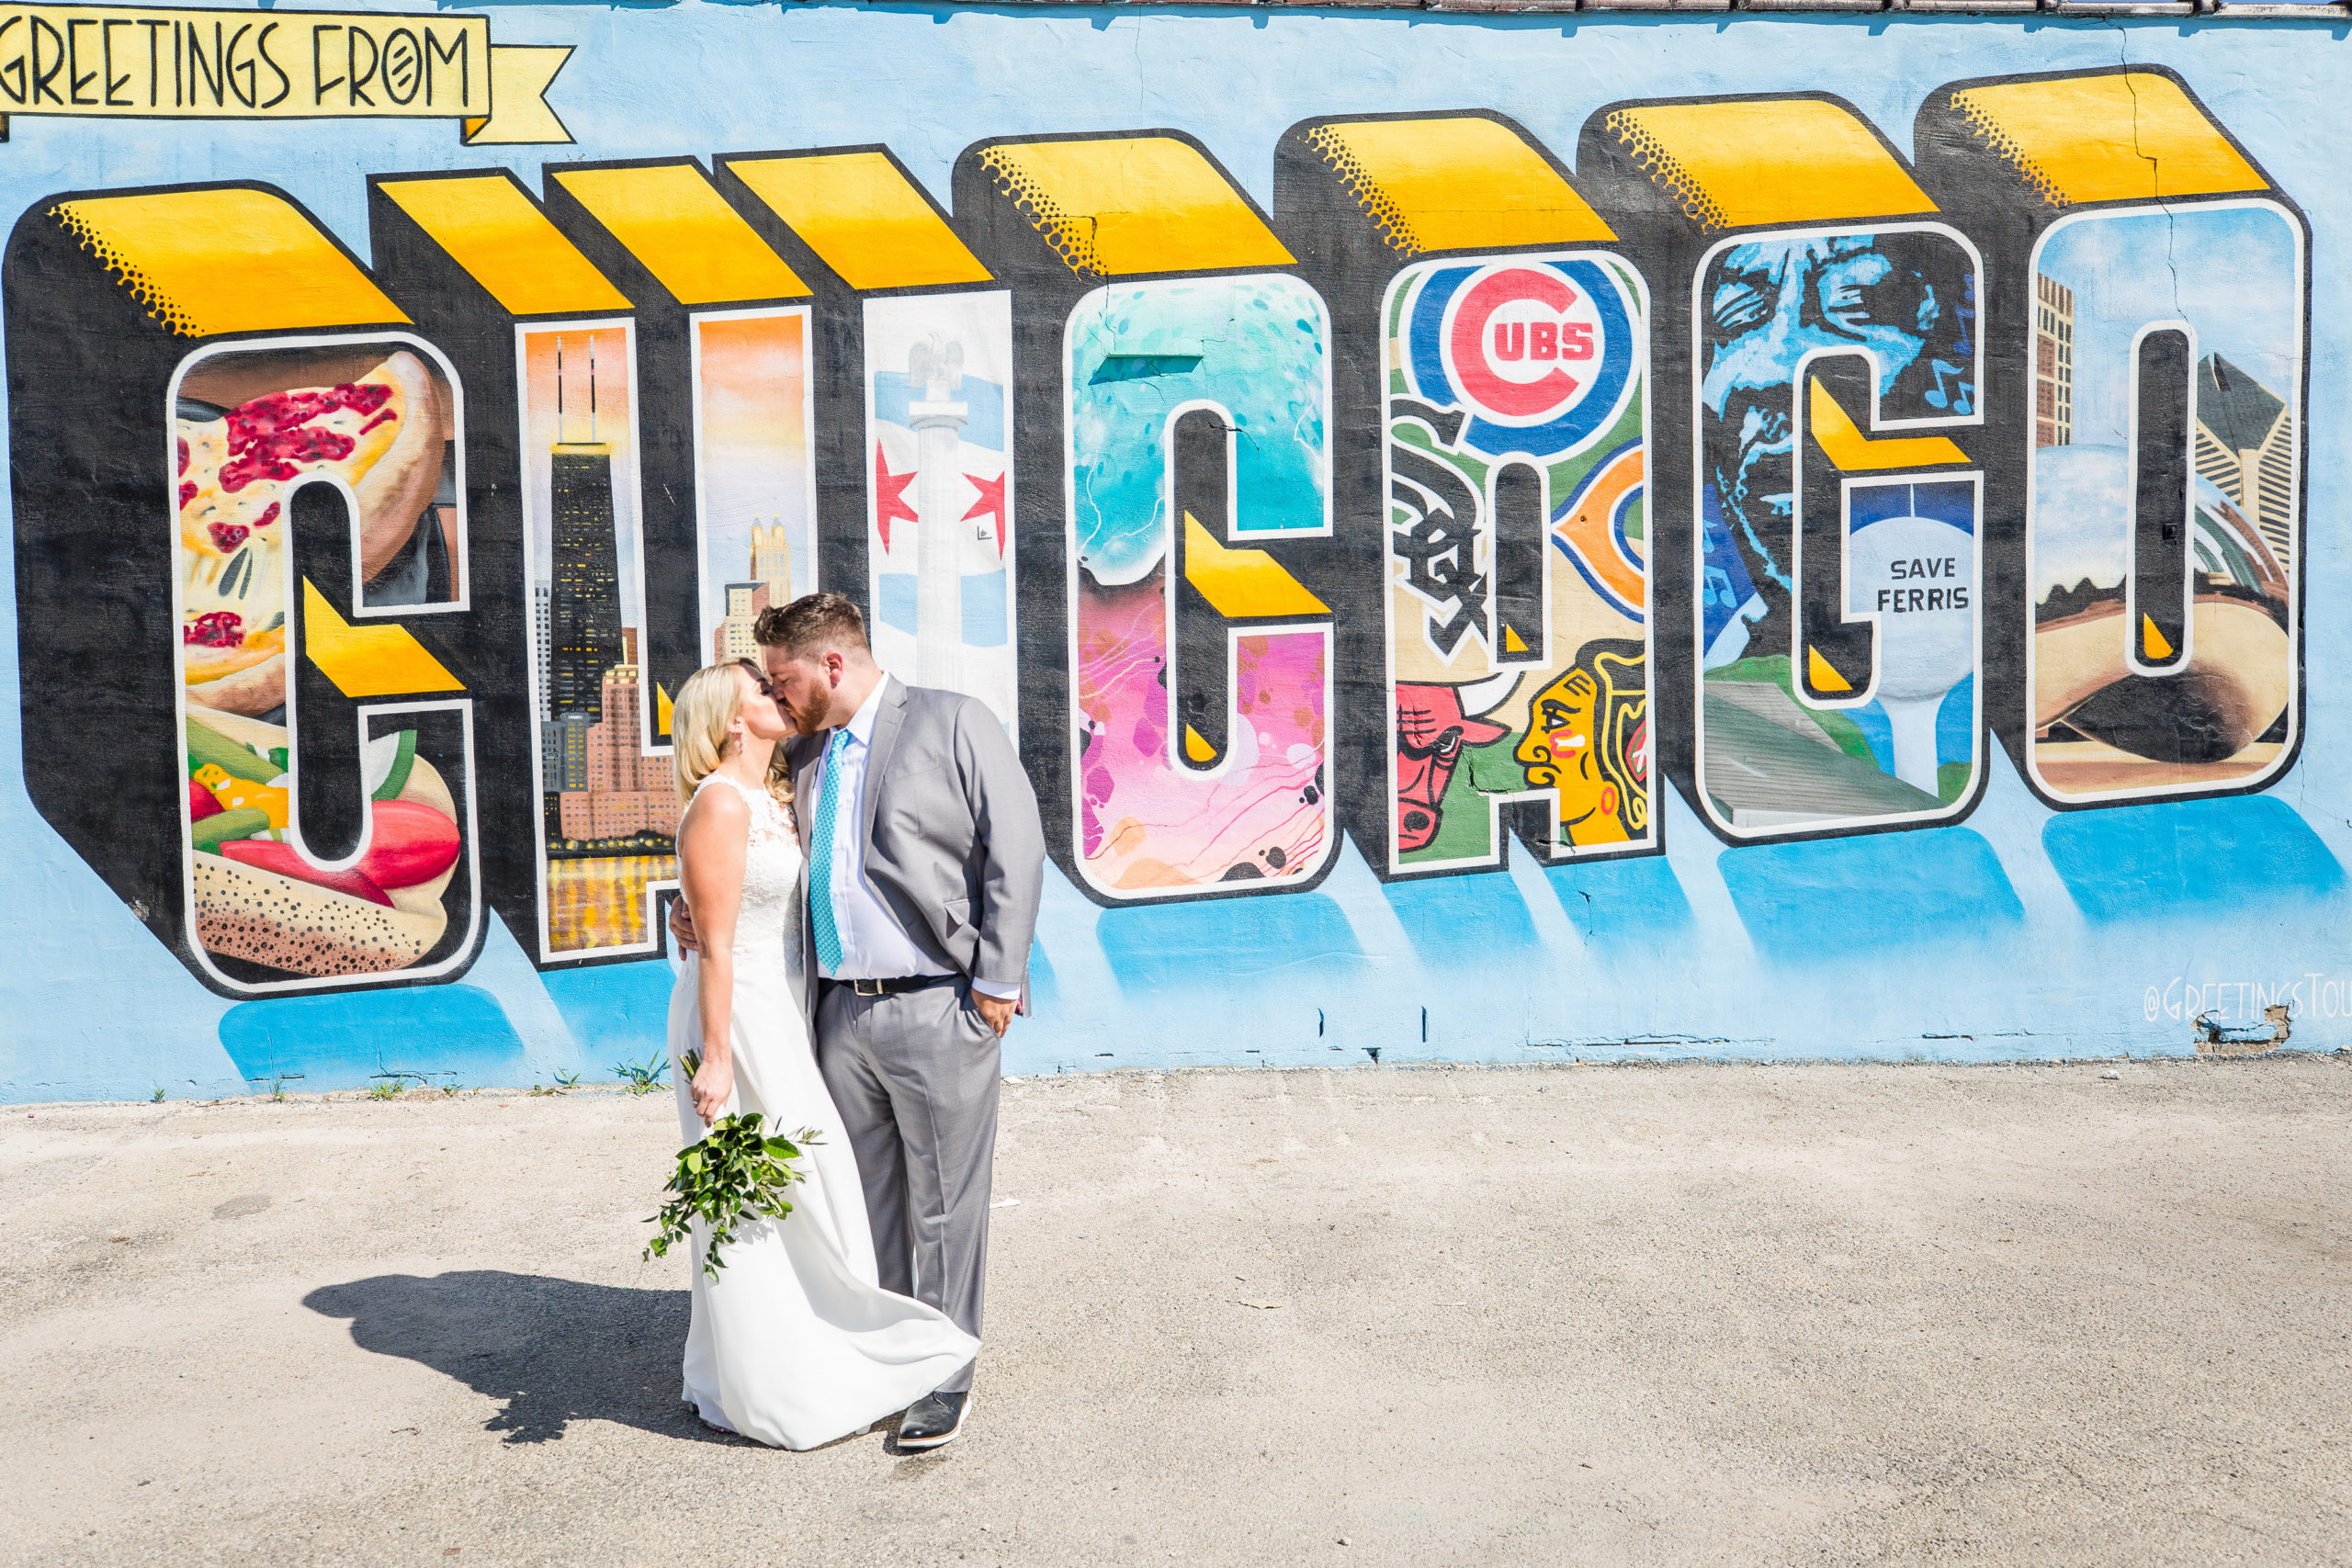 View More: http://kathryngracephotography.pass.us/kevinandcourtney